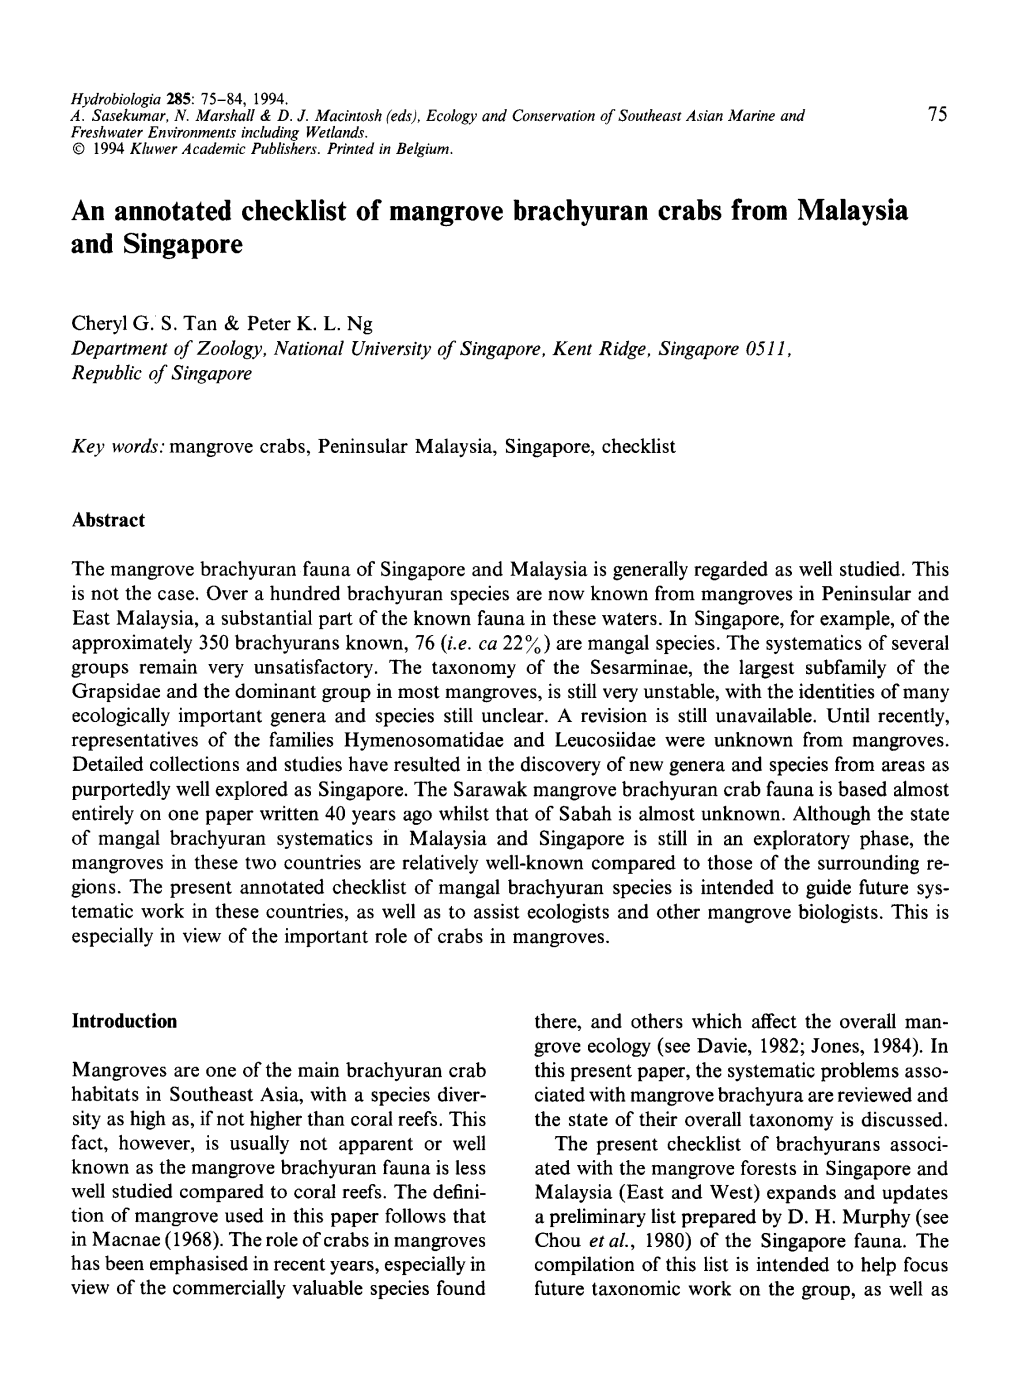 An Annotated Checklist of Mangrove Brachyuran Crabs from Malaysia and Singapore